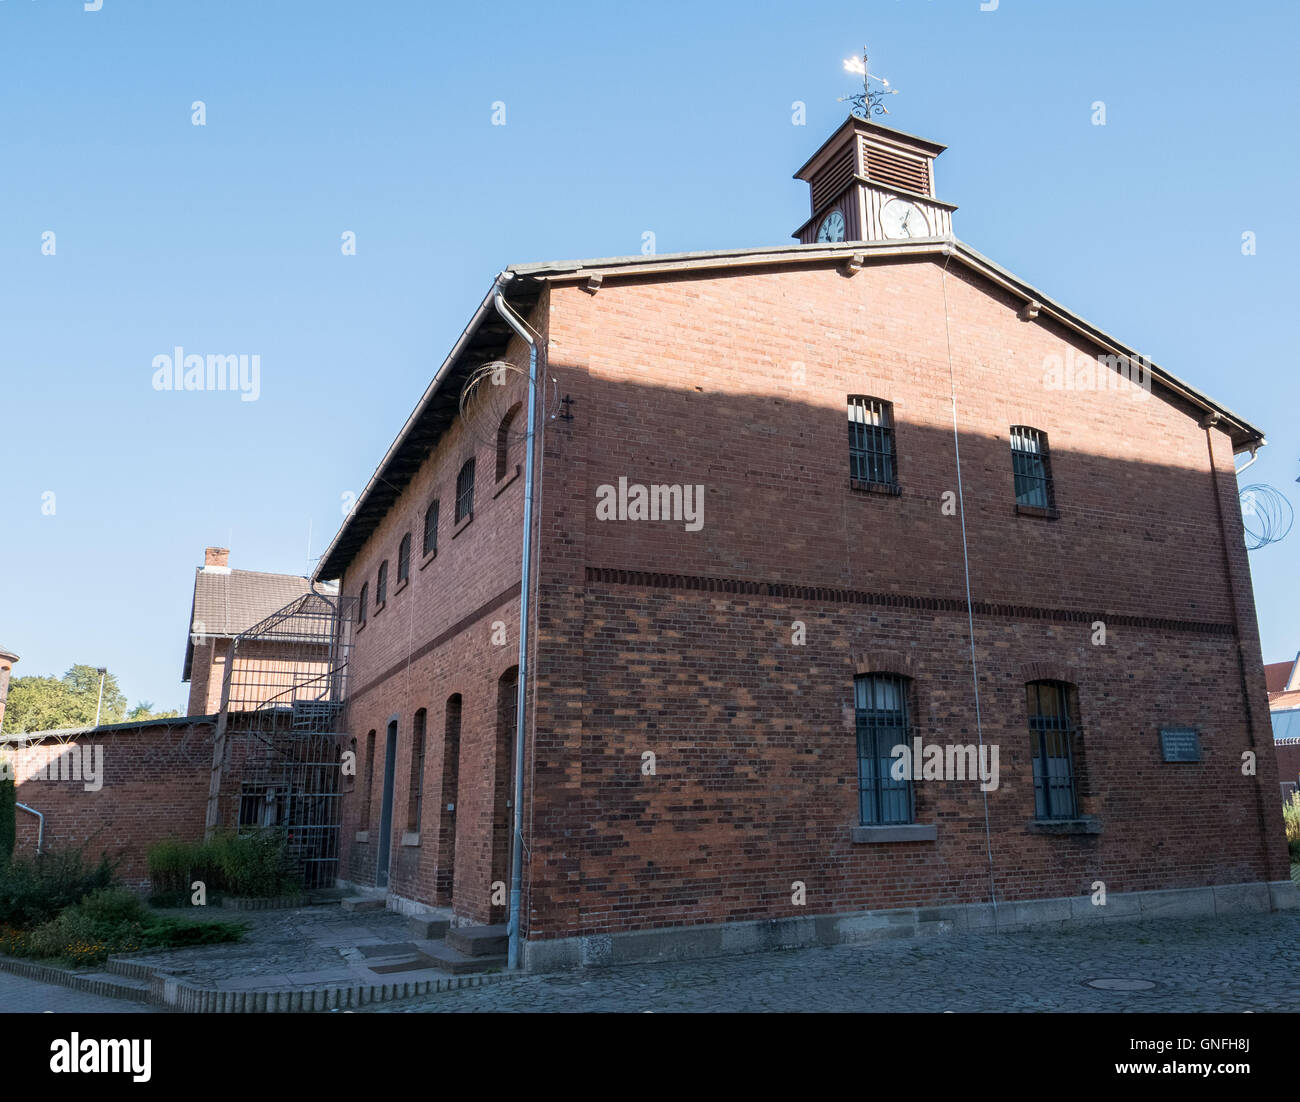 Wolfenbuettel, Germany. 25th Aug, 2016. The former execution house of the memorial site prison in Wolfenbuettel, Germany, 25 August 2016. The first part of the renovated NS memorial site in the prison is finished. The former execution site has been redeveloped as a memorial site. Photo: Peter Steffen/dpa (Alternativer crop of han309 from 25 August 2016)/dpa/Alamy Live News Stock Photo